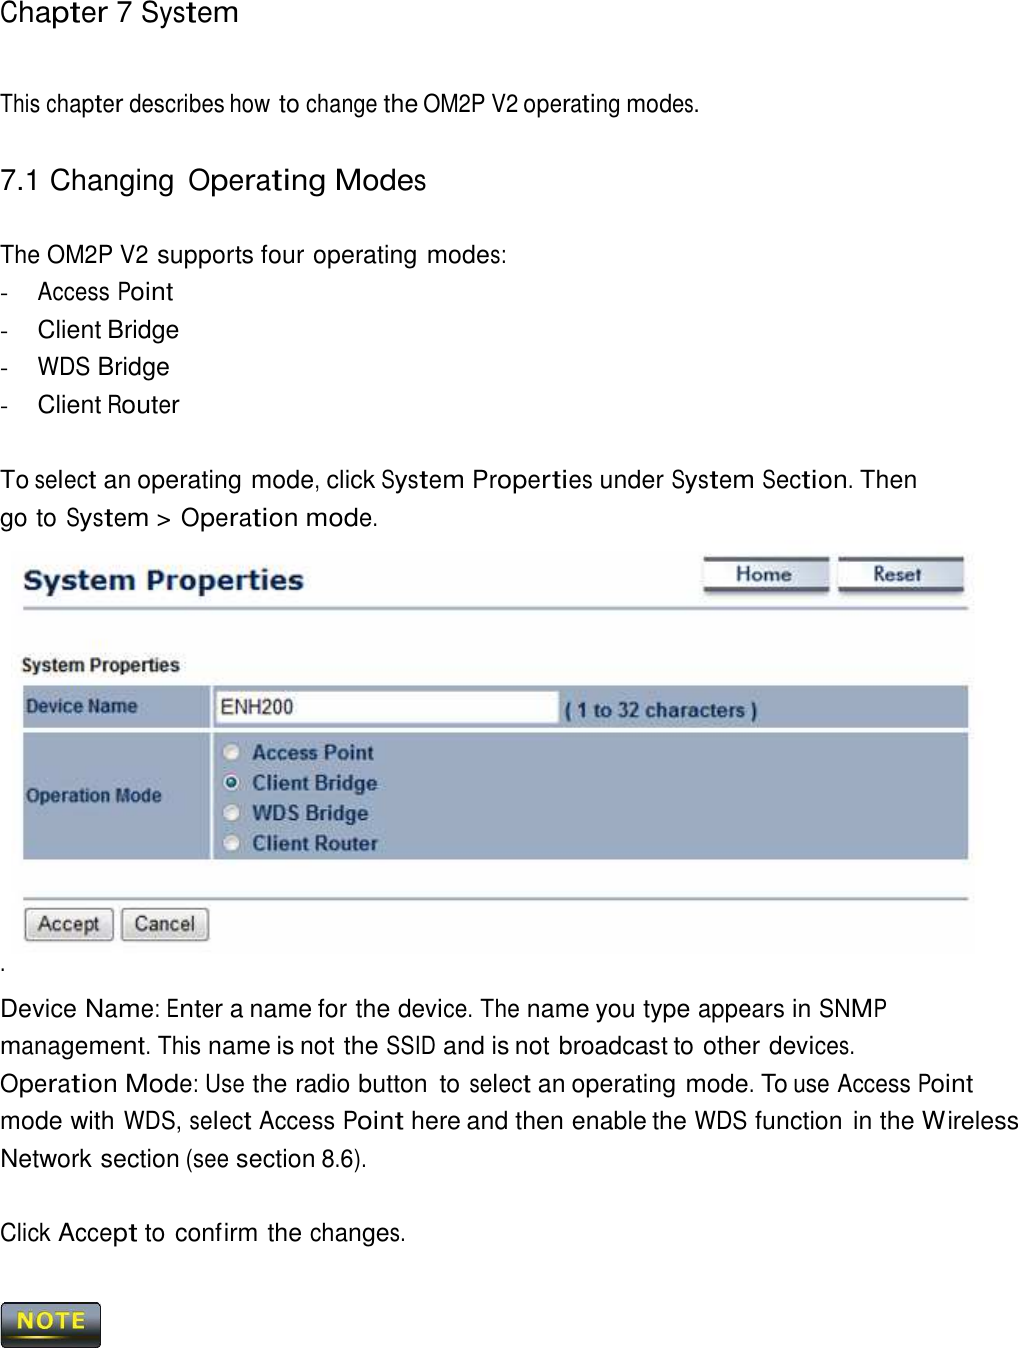 Chapter 7 System     This chapter describes how to change the OM2P V2 operating modes.   7.1 Changing Operating Modes   The OM2P V2 supports four operating modes: - Access Point - Client Bridge - WDS Bridge - Client Router   To select an operating mode, click System Properties under System Section. Then go to System &gt; Operation mode. .   Device Name: Enter a name for the device. The name you type appears in SNMP management. This name is not the SSID and is not broadcast to other devices.  Operation Mode: Use the radio button  to select an operating mode. To use Access Point mode with WDS, select Access Point here and then enable the WDS function in the Wireless Network section (see section 8.6).   Click Accept to confirm the changes.     